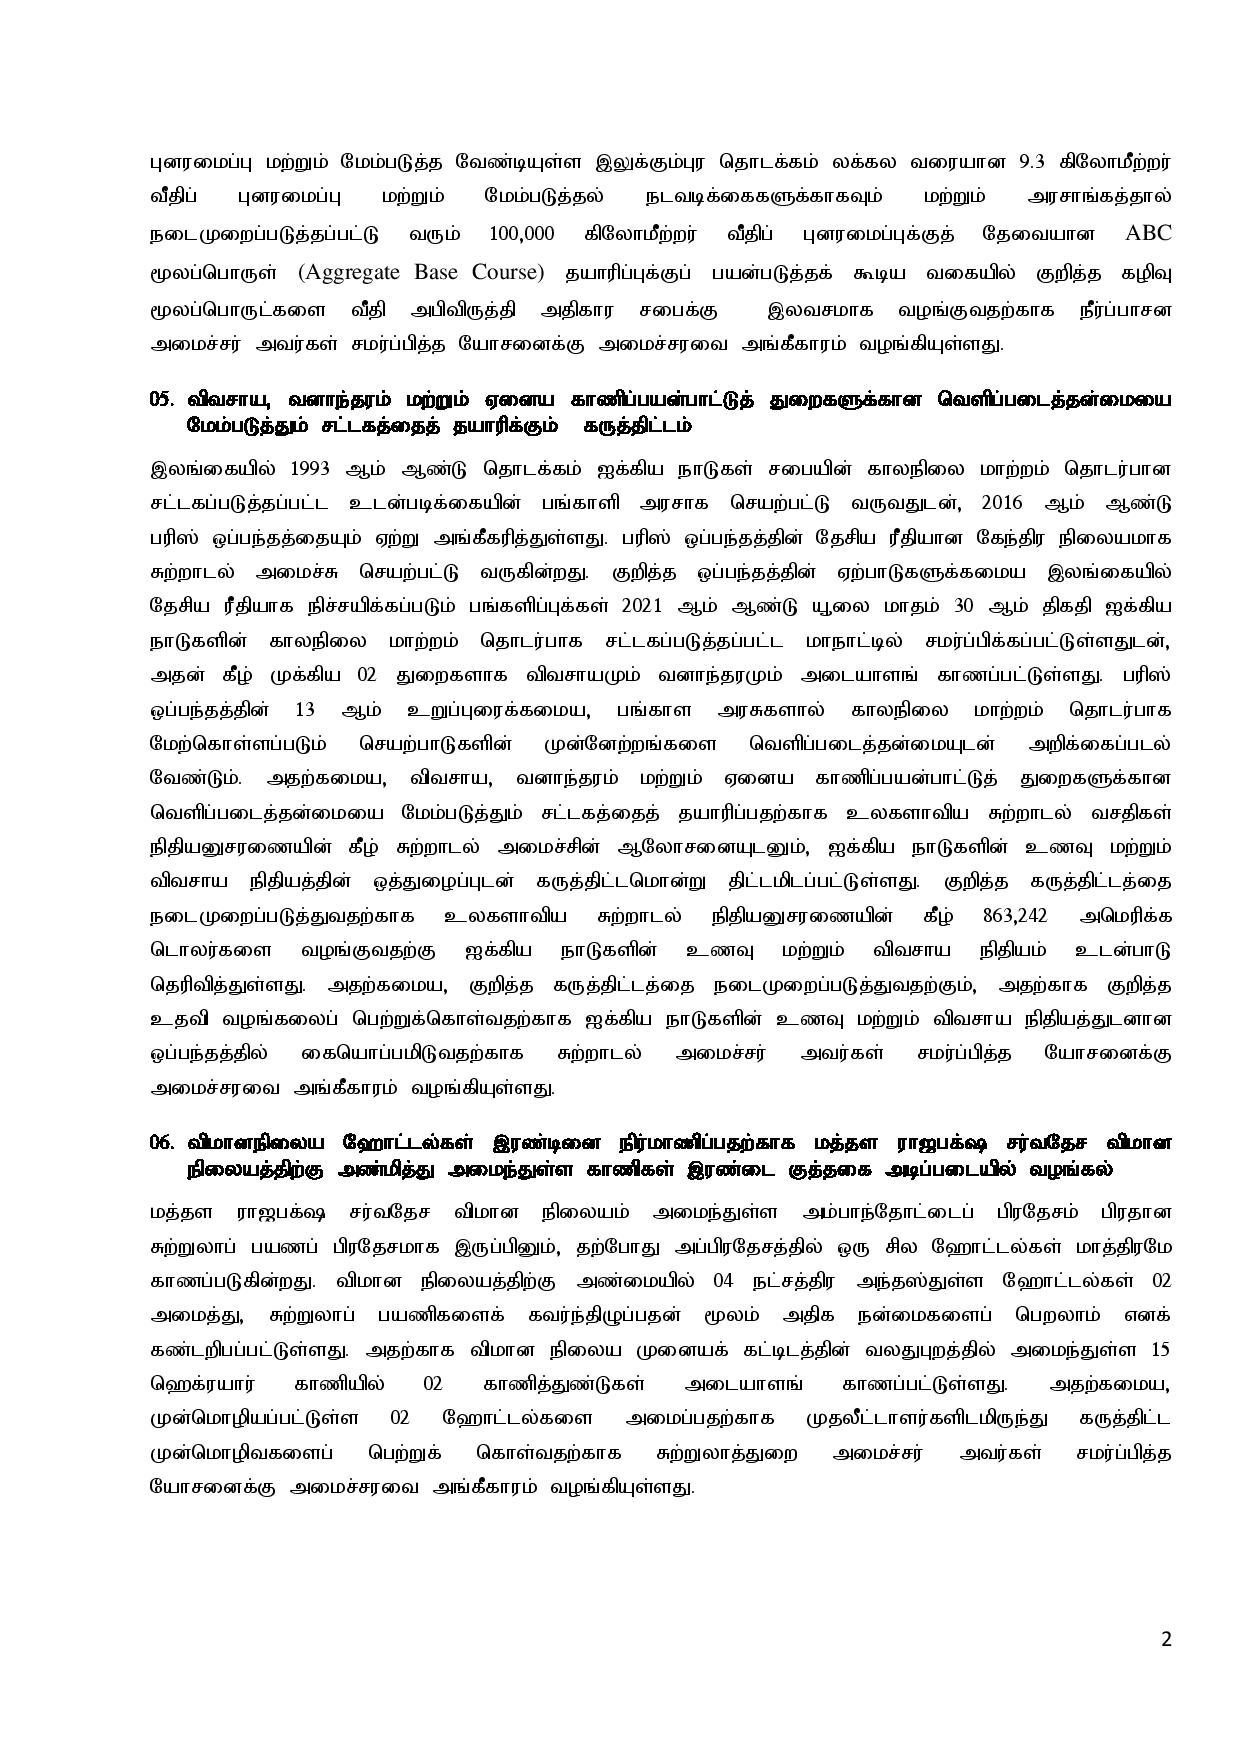 Cabinet Decisions on 14.03.2022 Tamil page 002